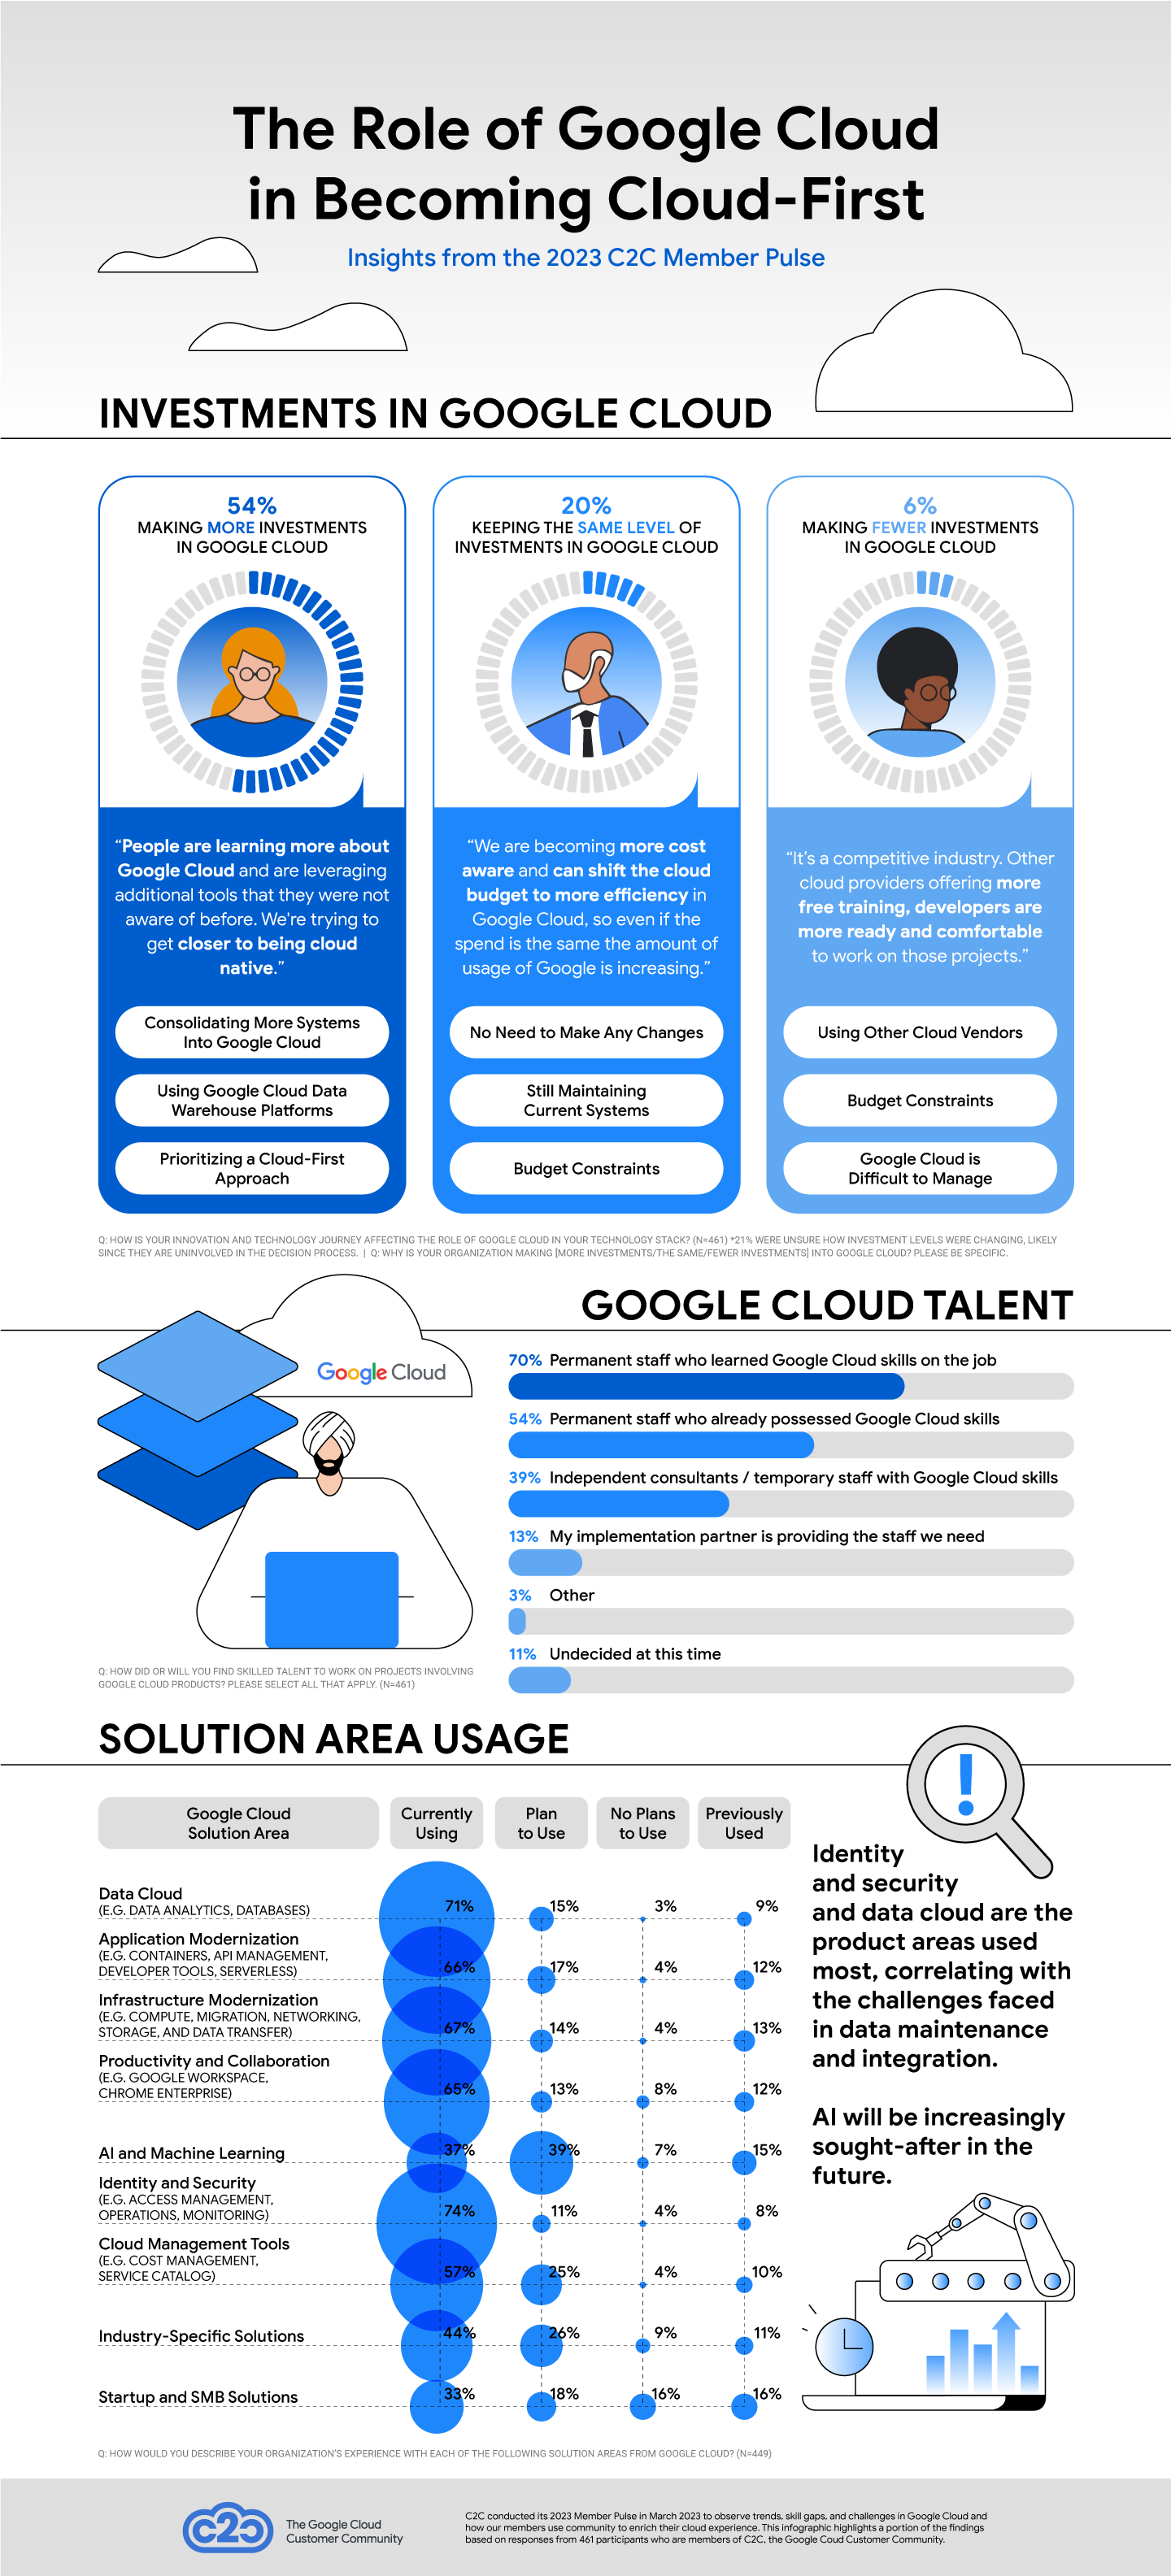 Infographic detailing priorities and challenges of using cloud technology, as observed from responses of C2C members who participated in the 2023 Member Pulse survey.